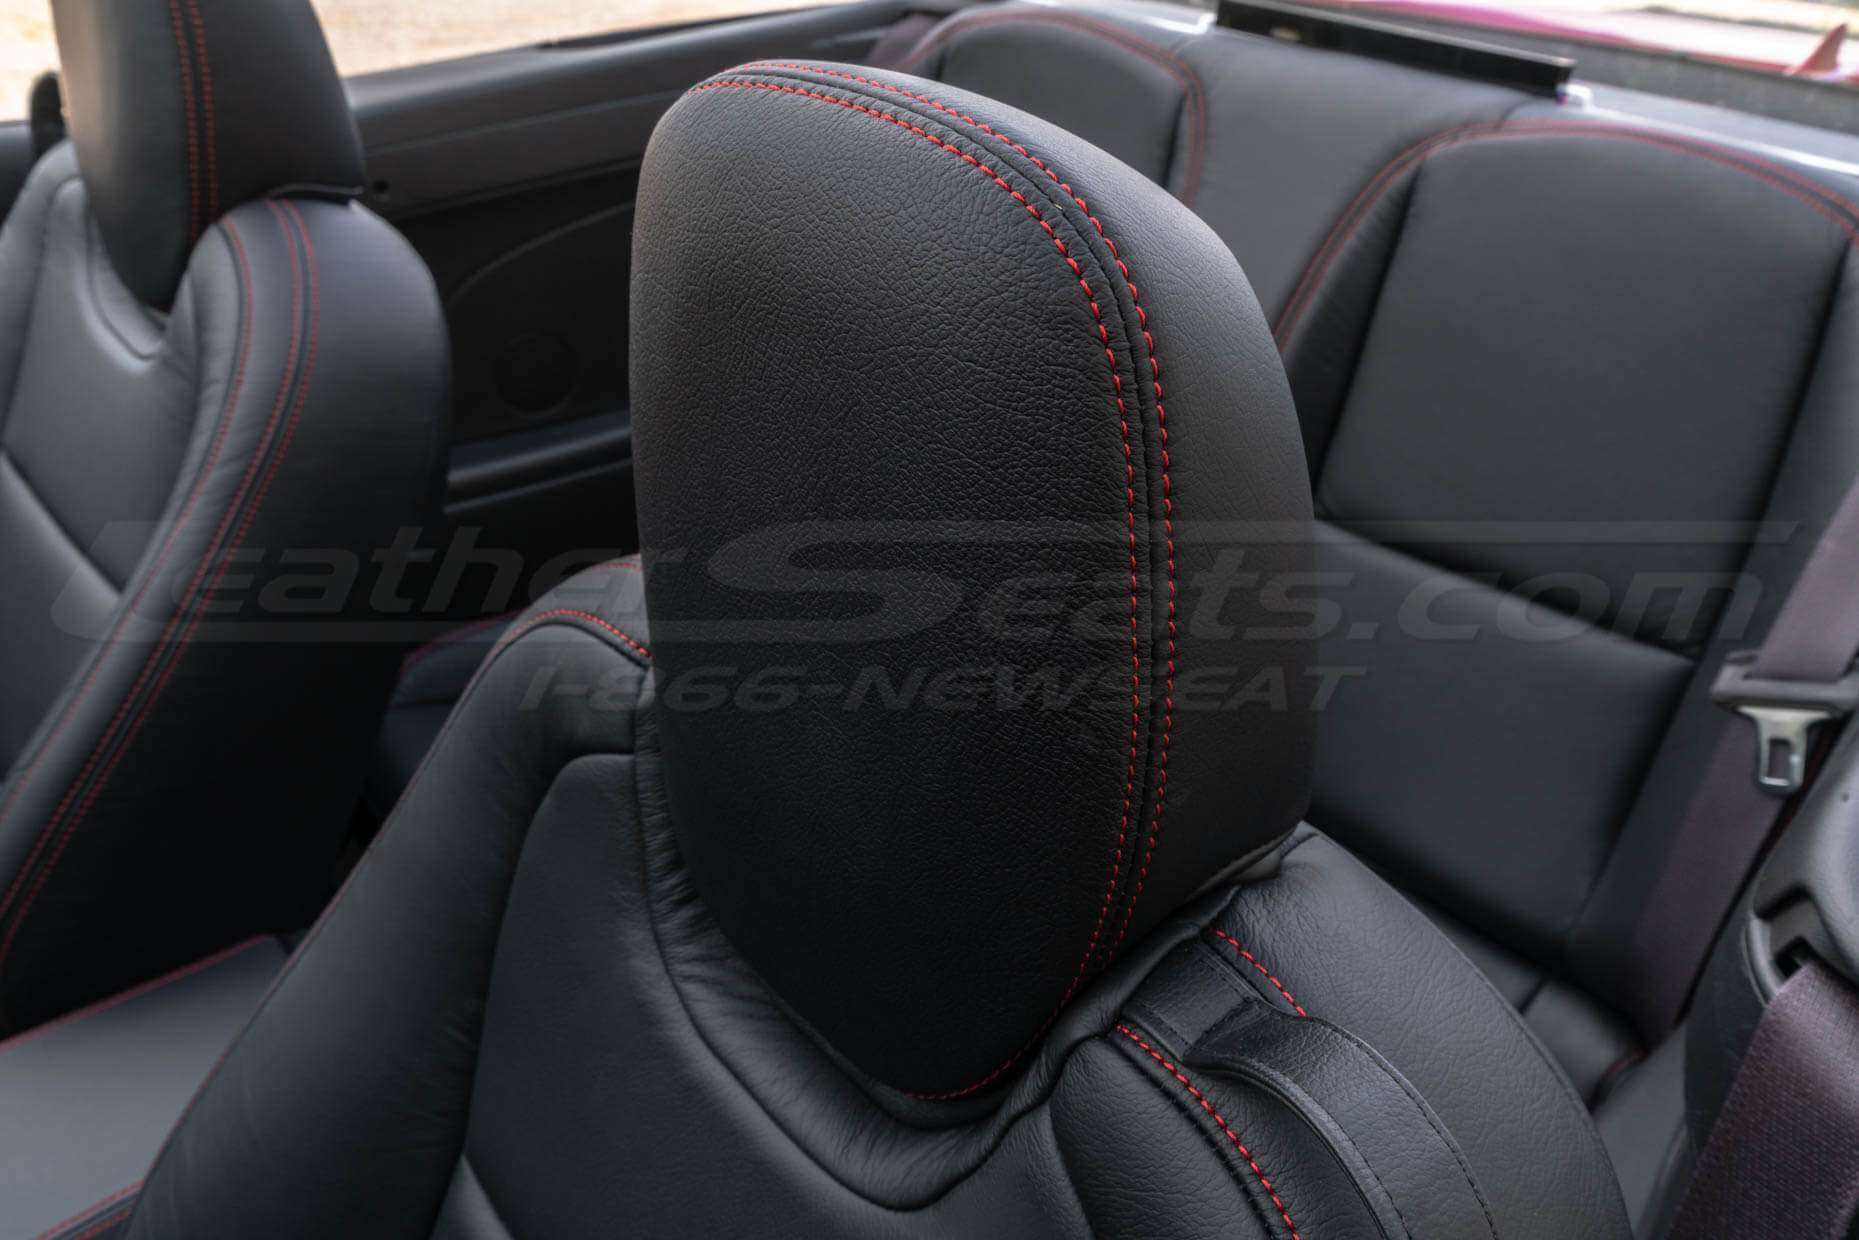 Chevrolet Camaro leather headrest with Cardinal double-stitching